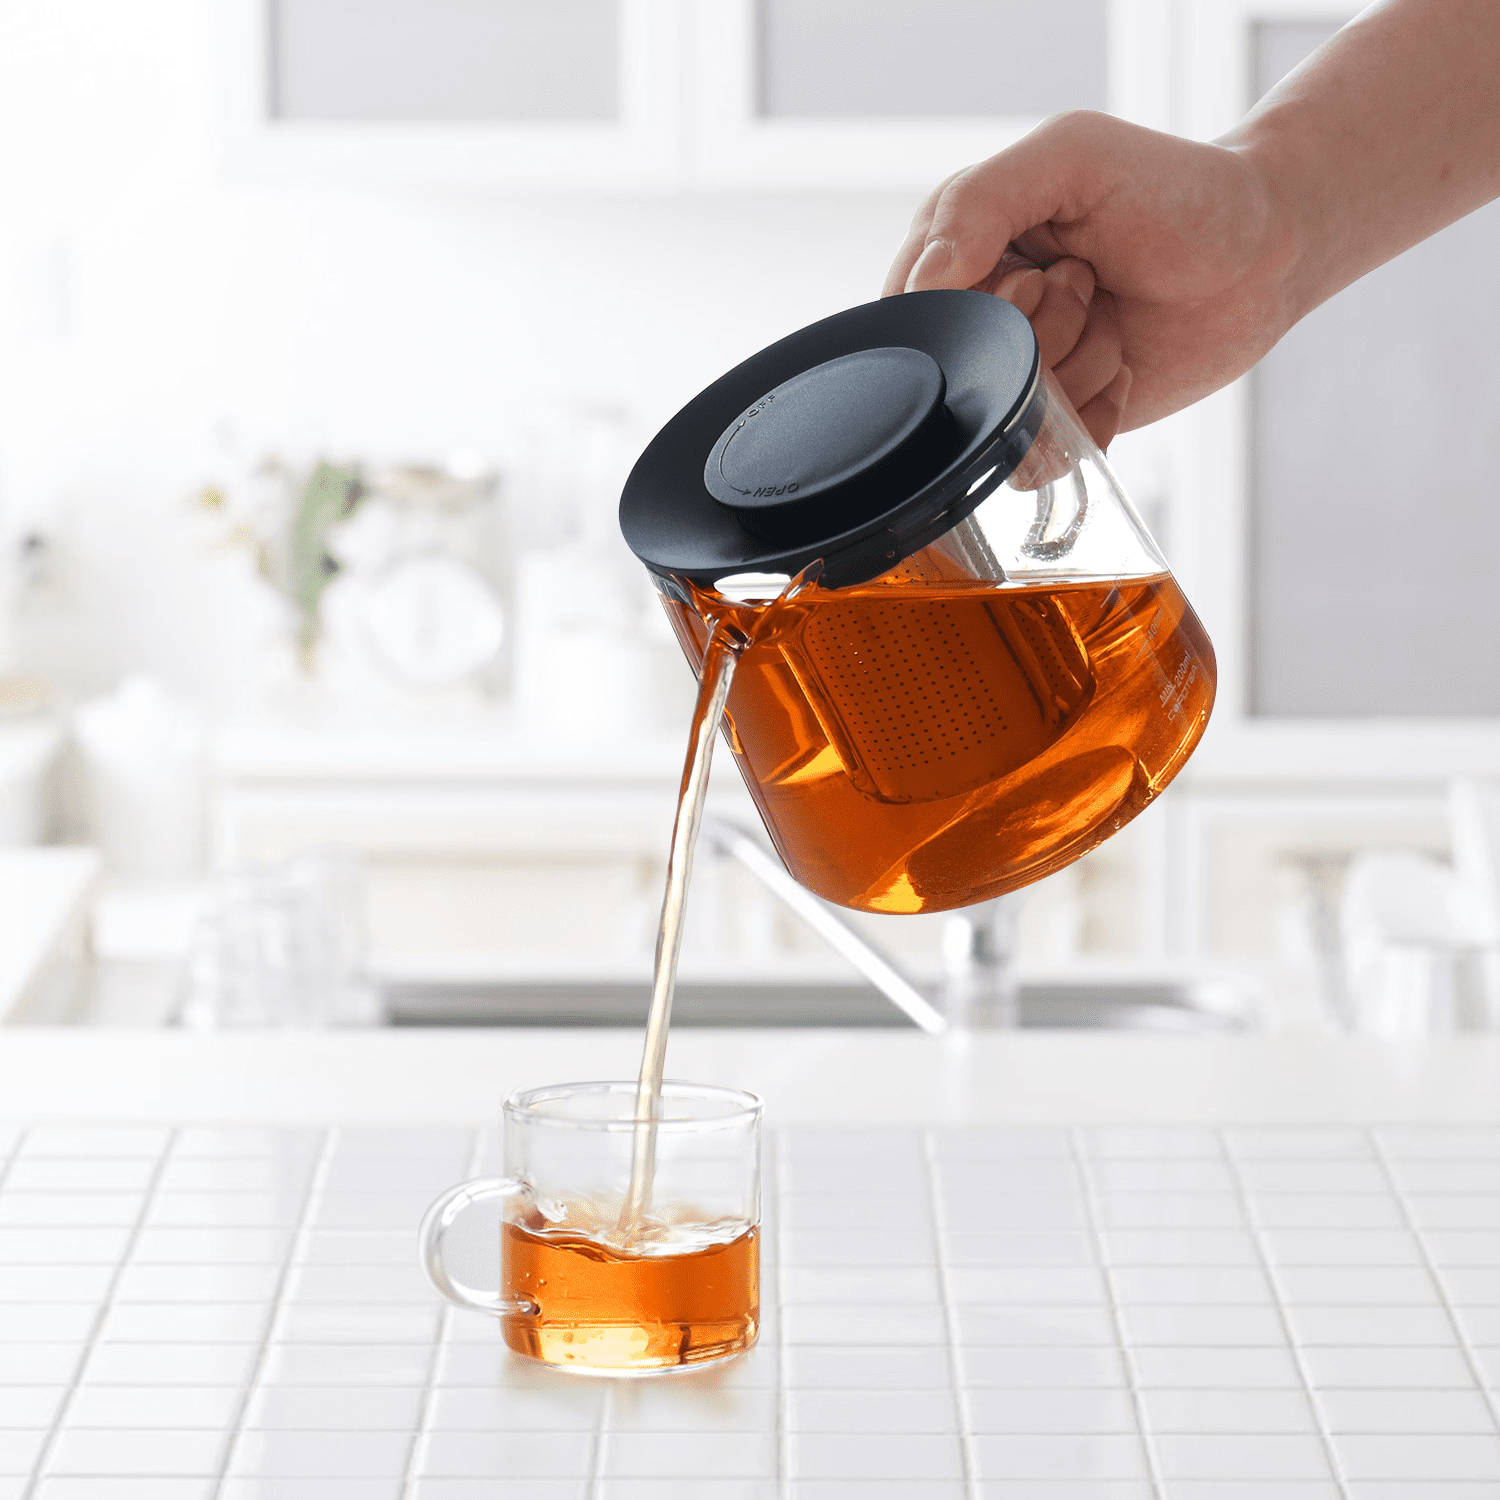 Unbreakable Glass Teapot,1000ml/34oz Borosilicate Glass Teapot with  Removable Infuser, Stovetop Safe Tea Kettle,Blooming and Loose Leaf Tea  Maker